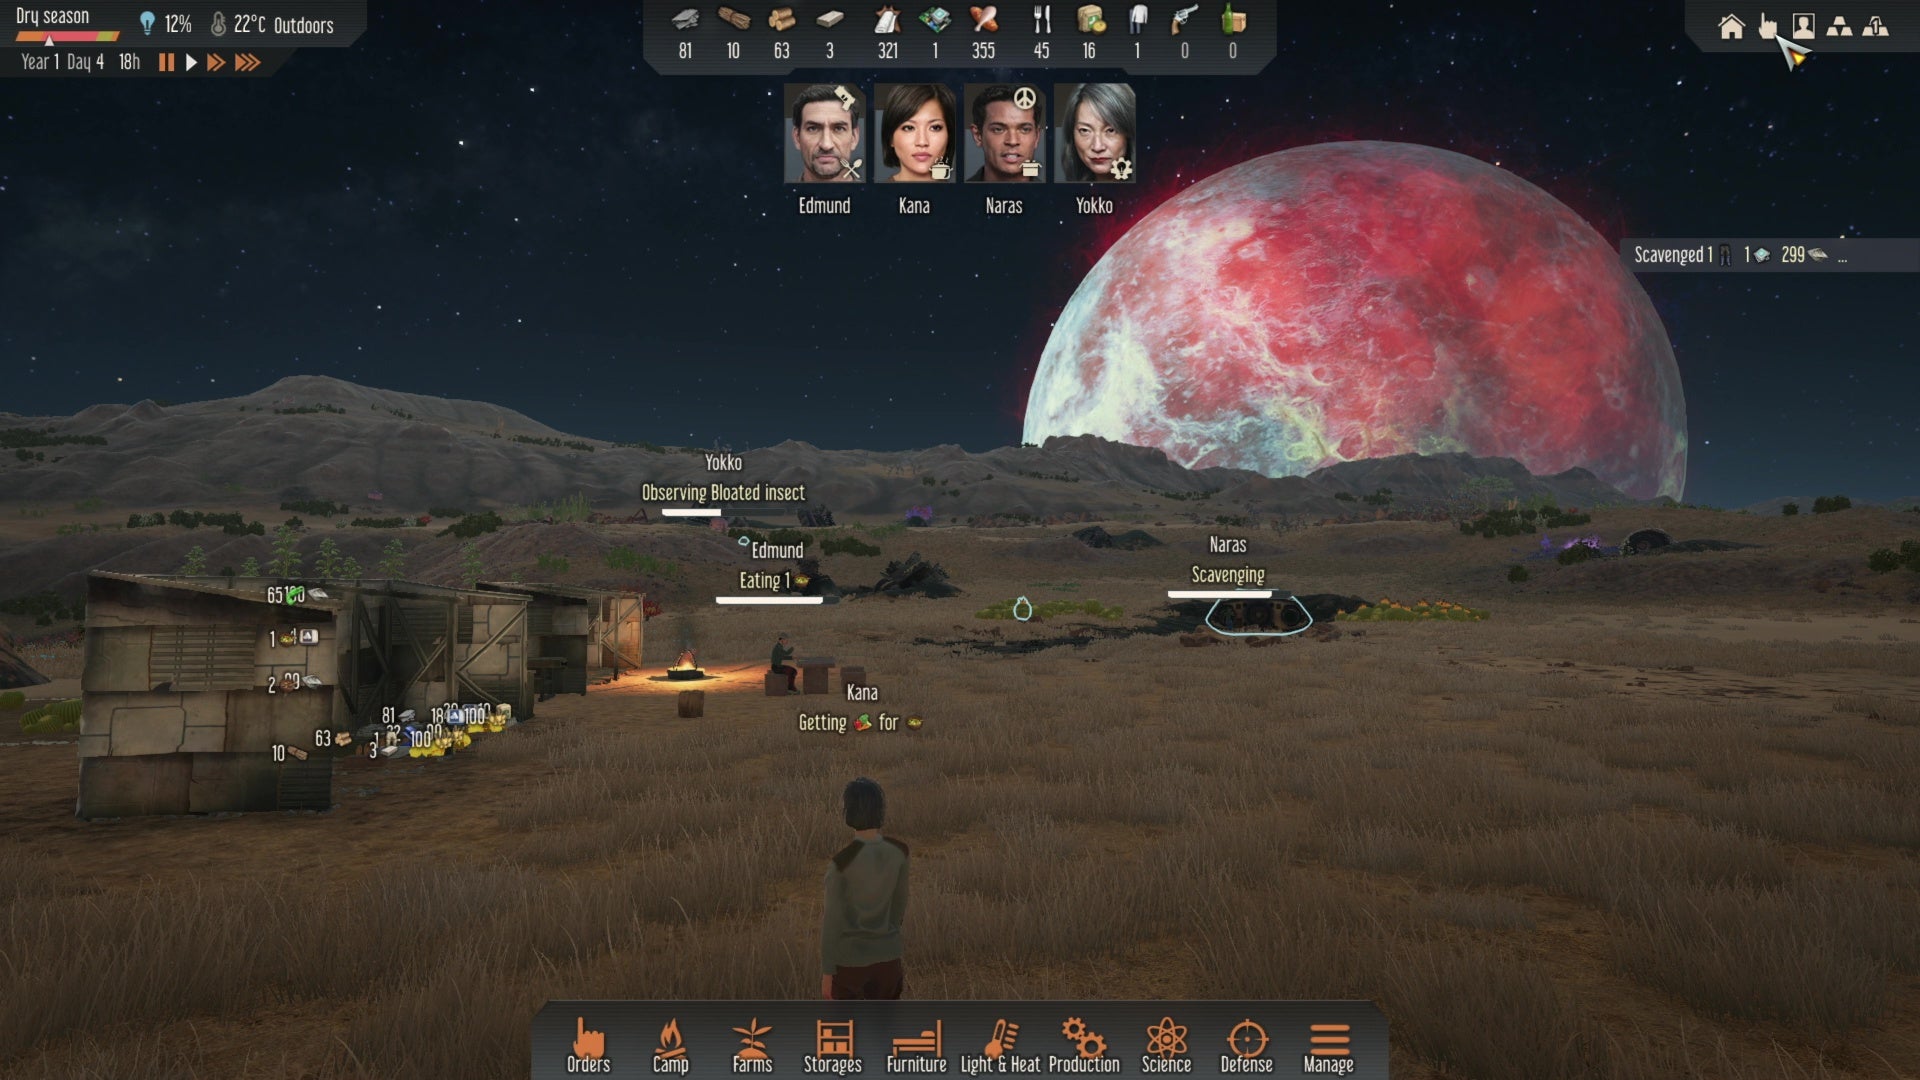 A night time scene at a camp with a large red moon in the background in Stranded: Alien Dawn